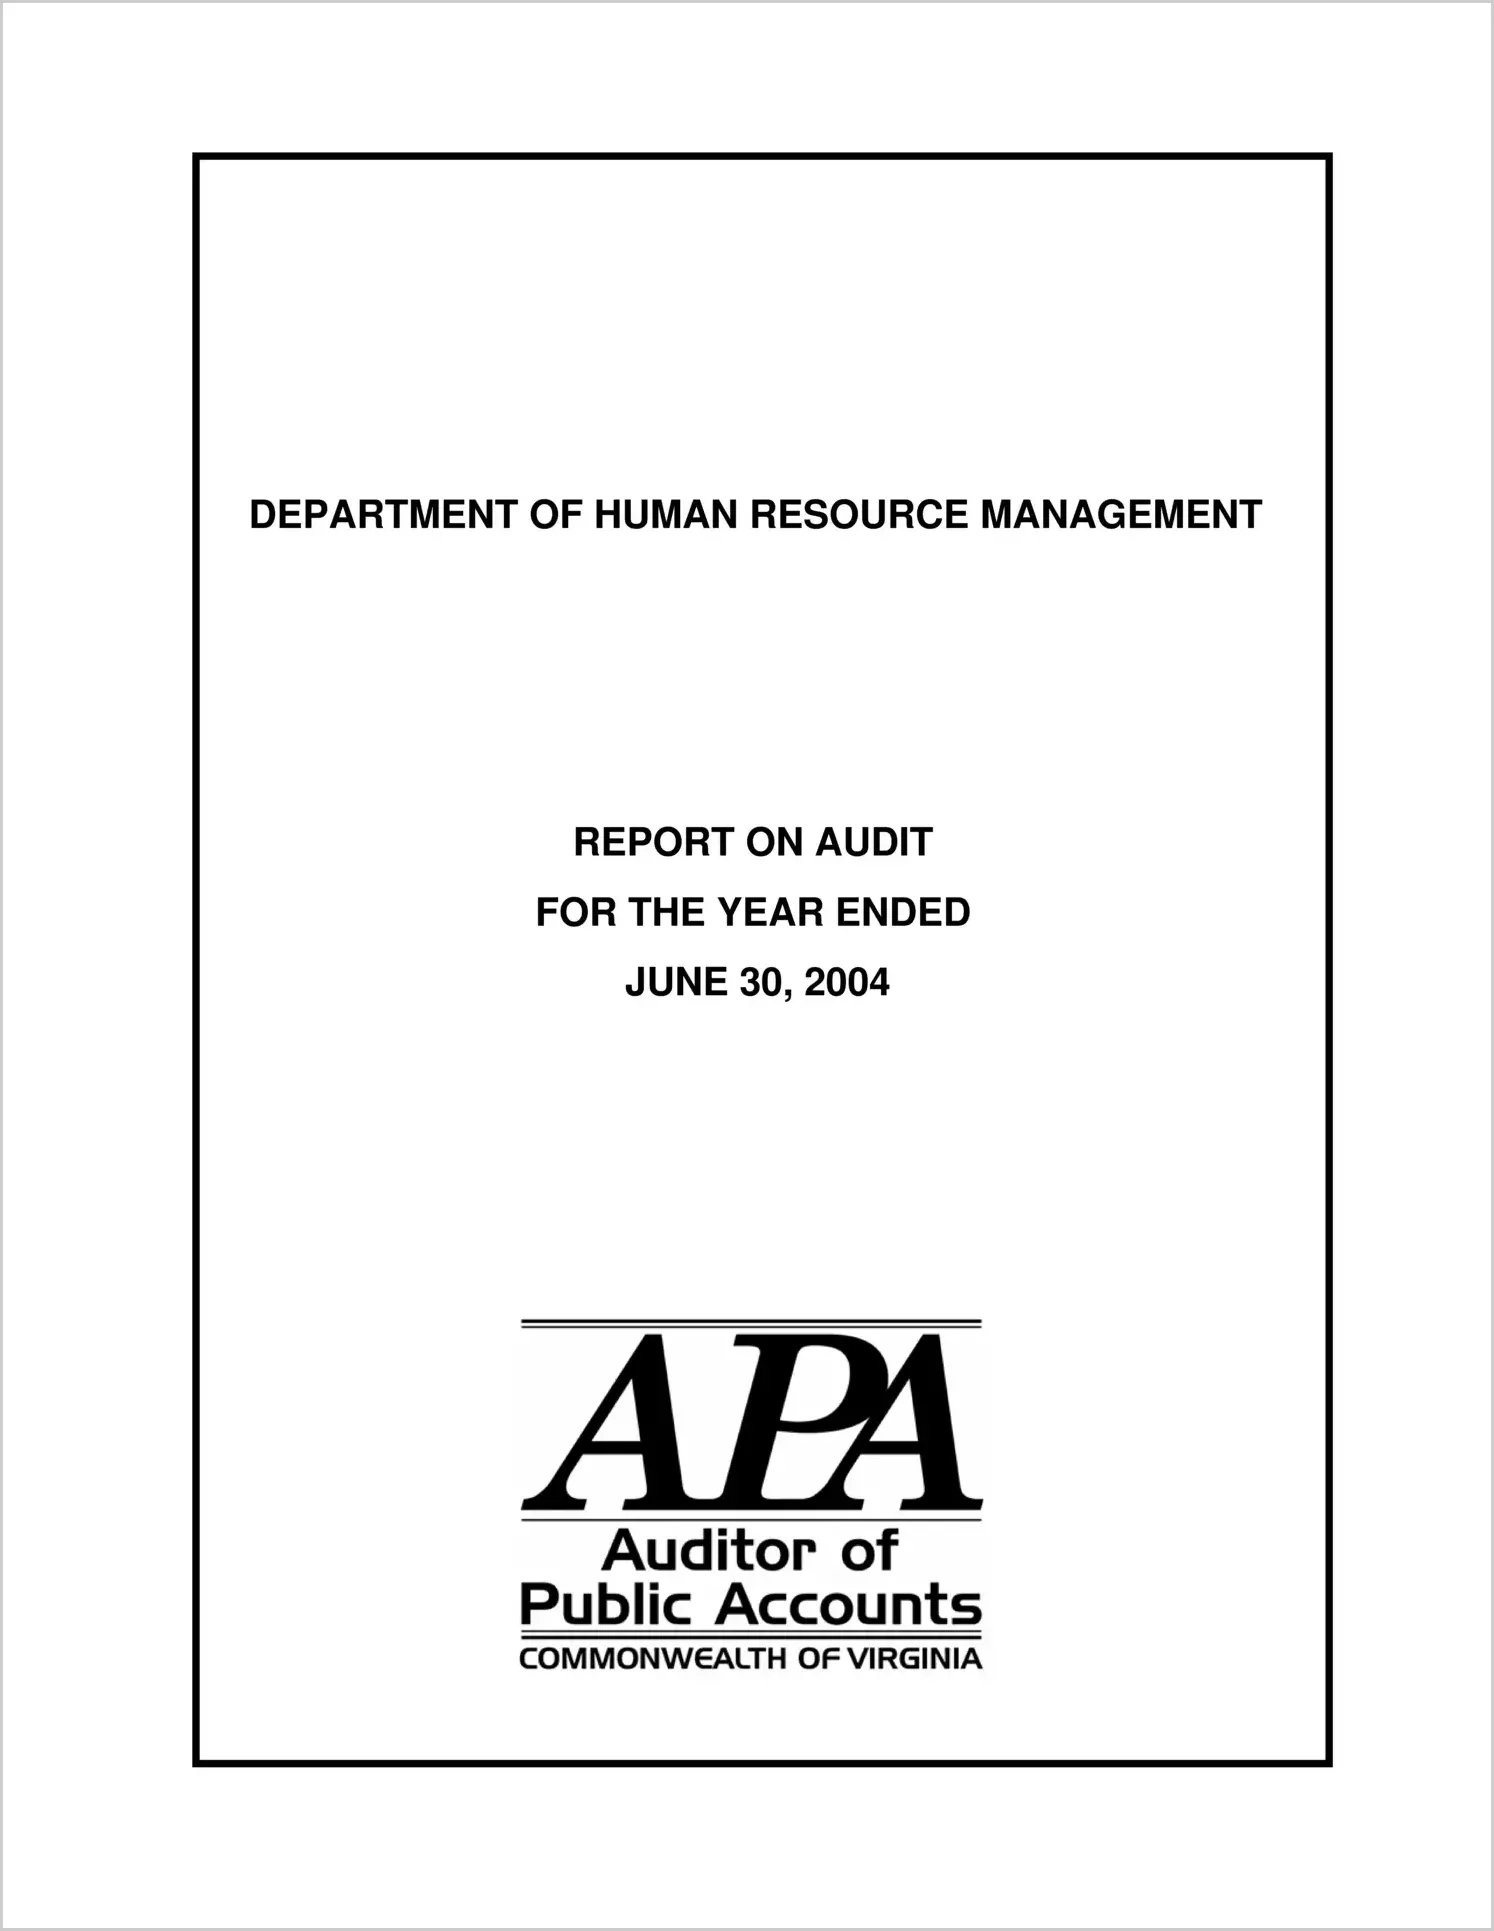 Department of Human Resource Management for the year ended June 30, 2004